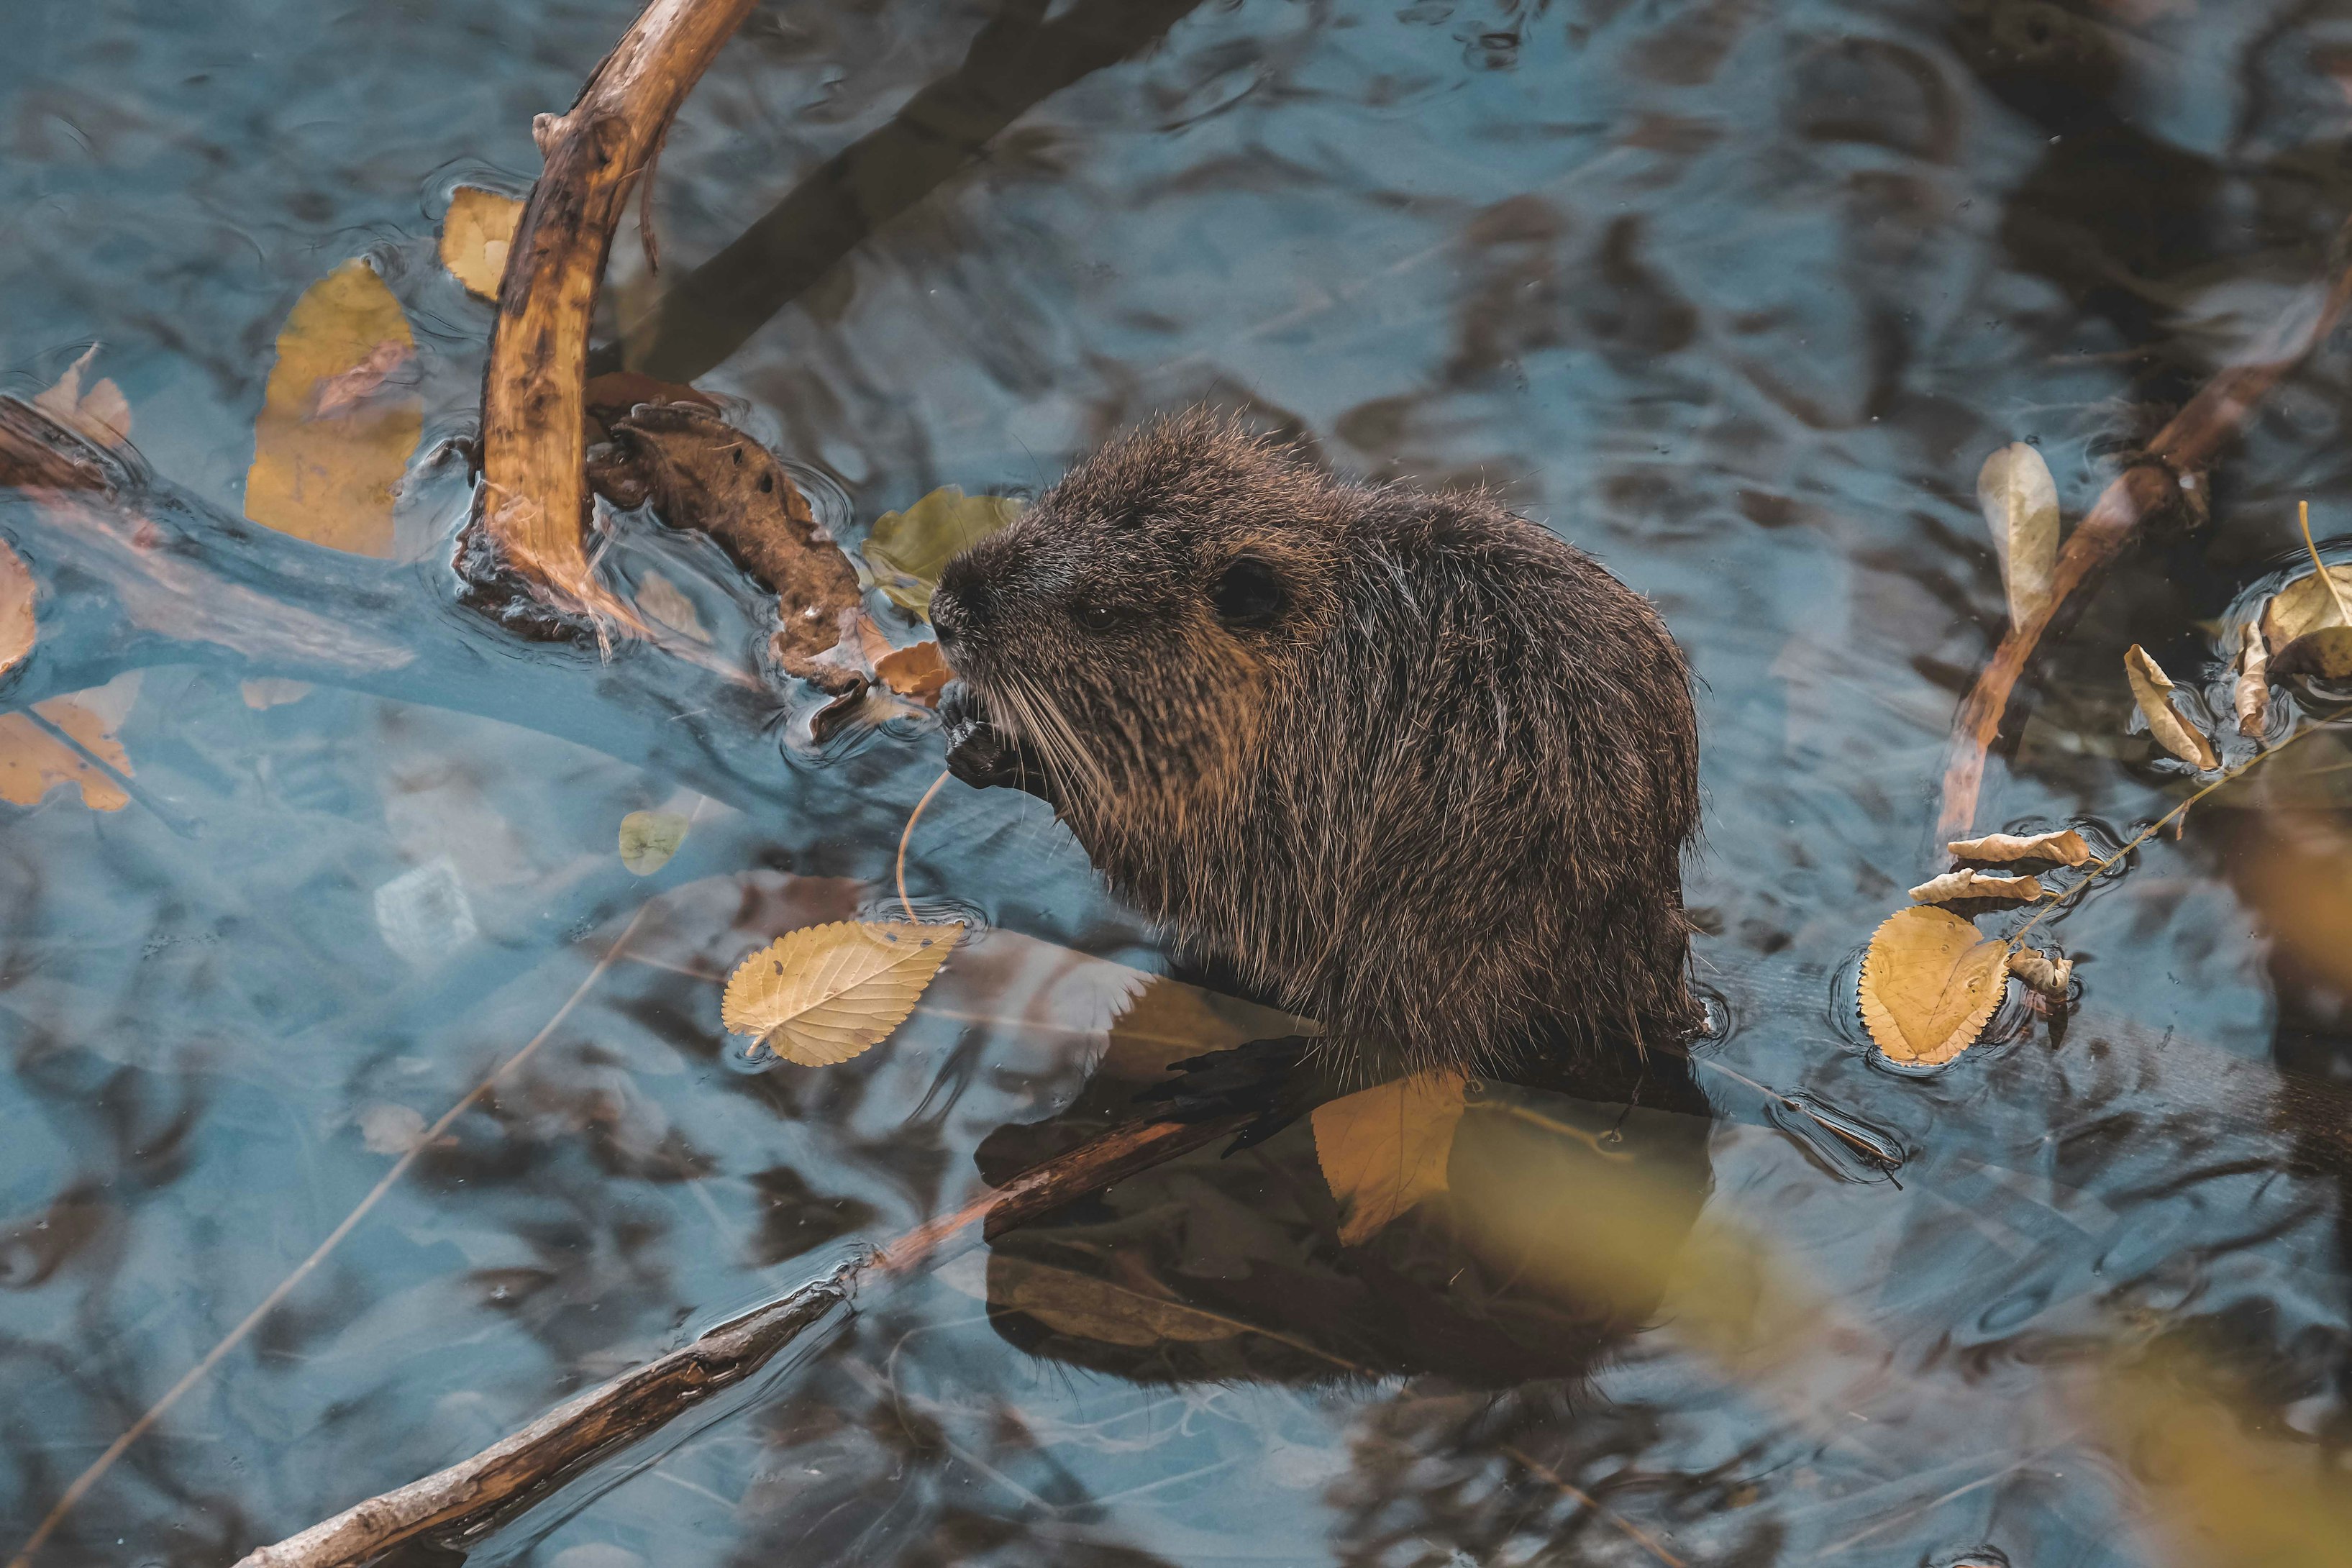 5,000 Years Later, Beavers Return to the High Plains of West Texas